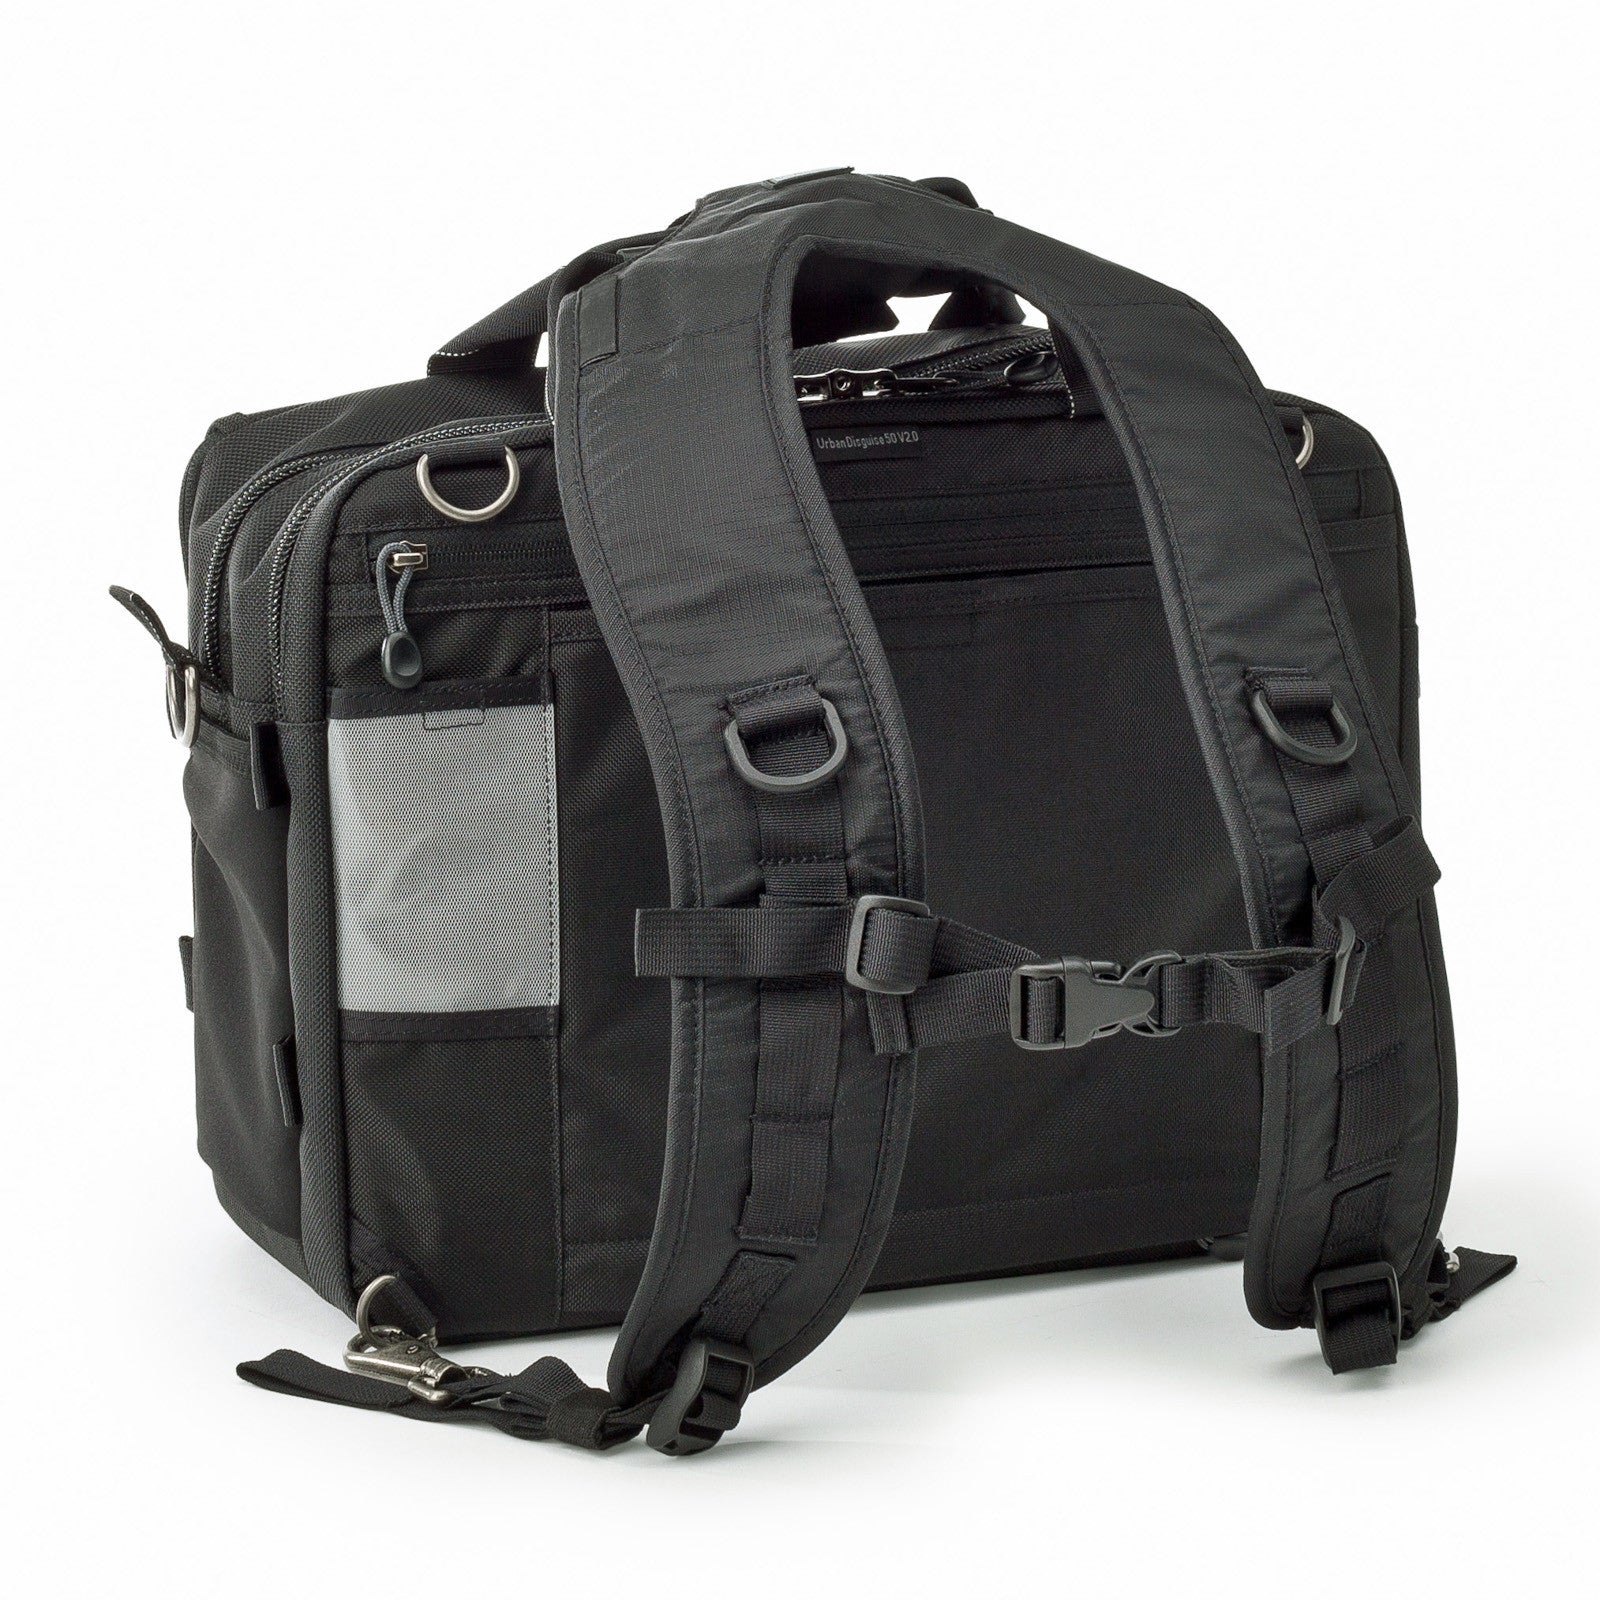 Backpack Conversion Straps • Think Tank Photo